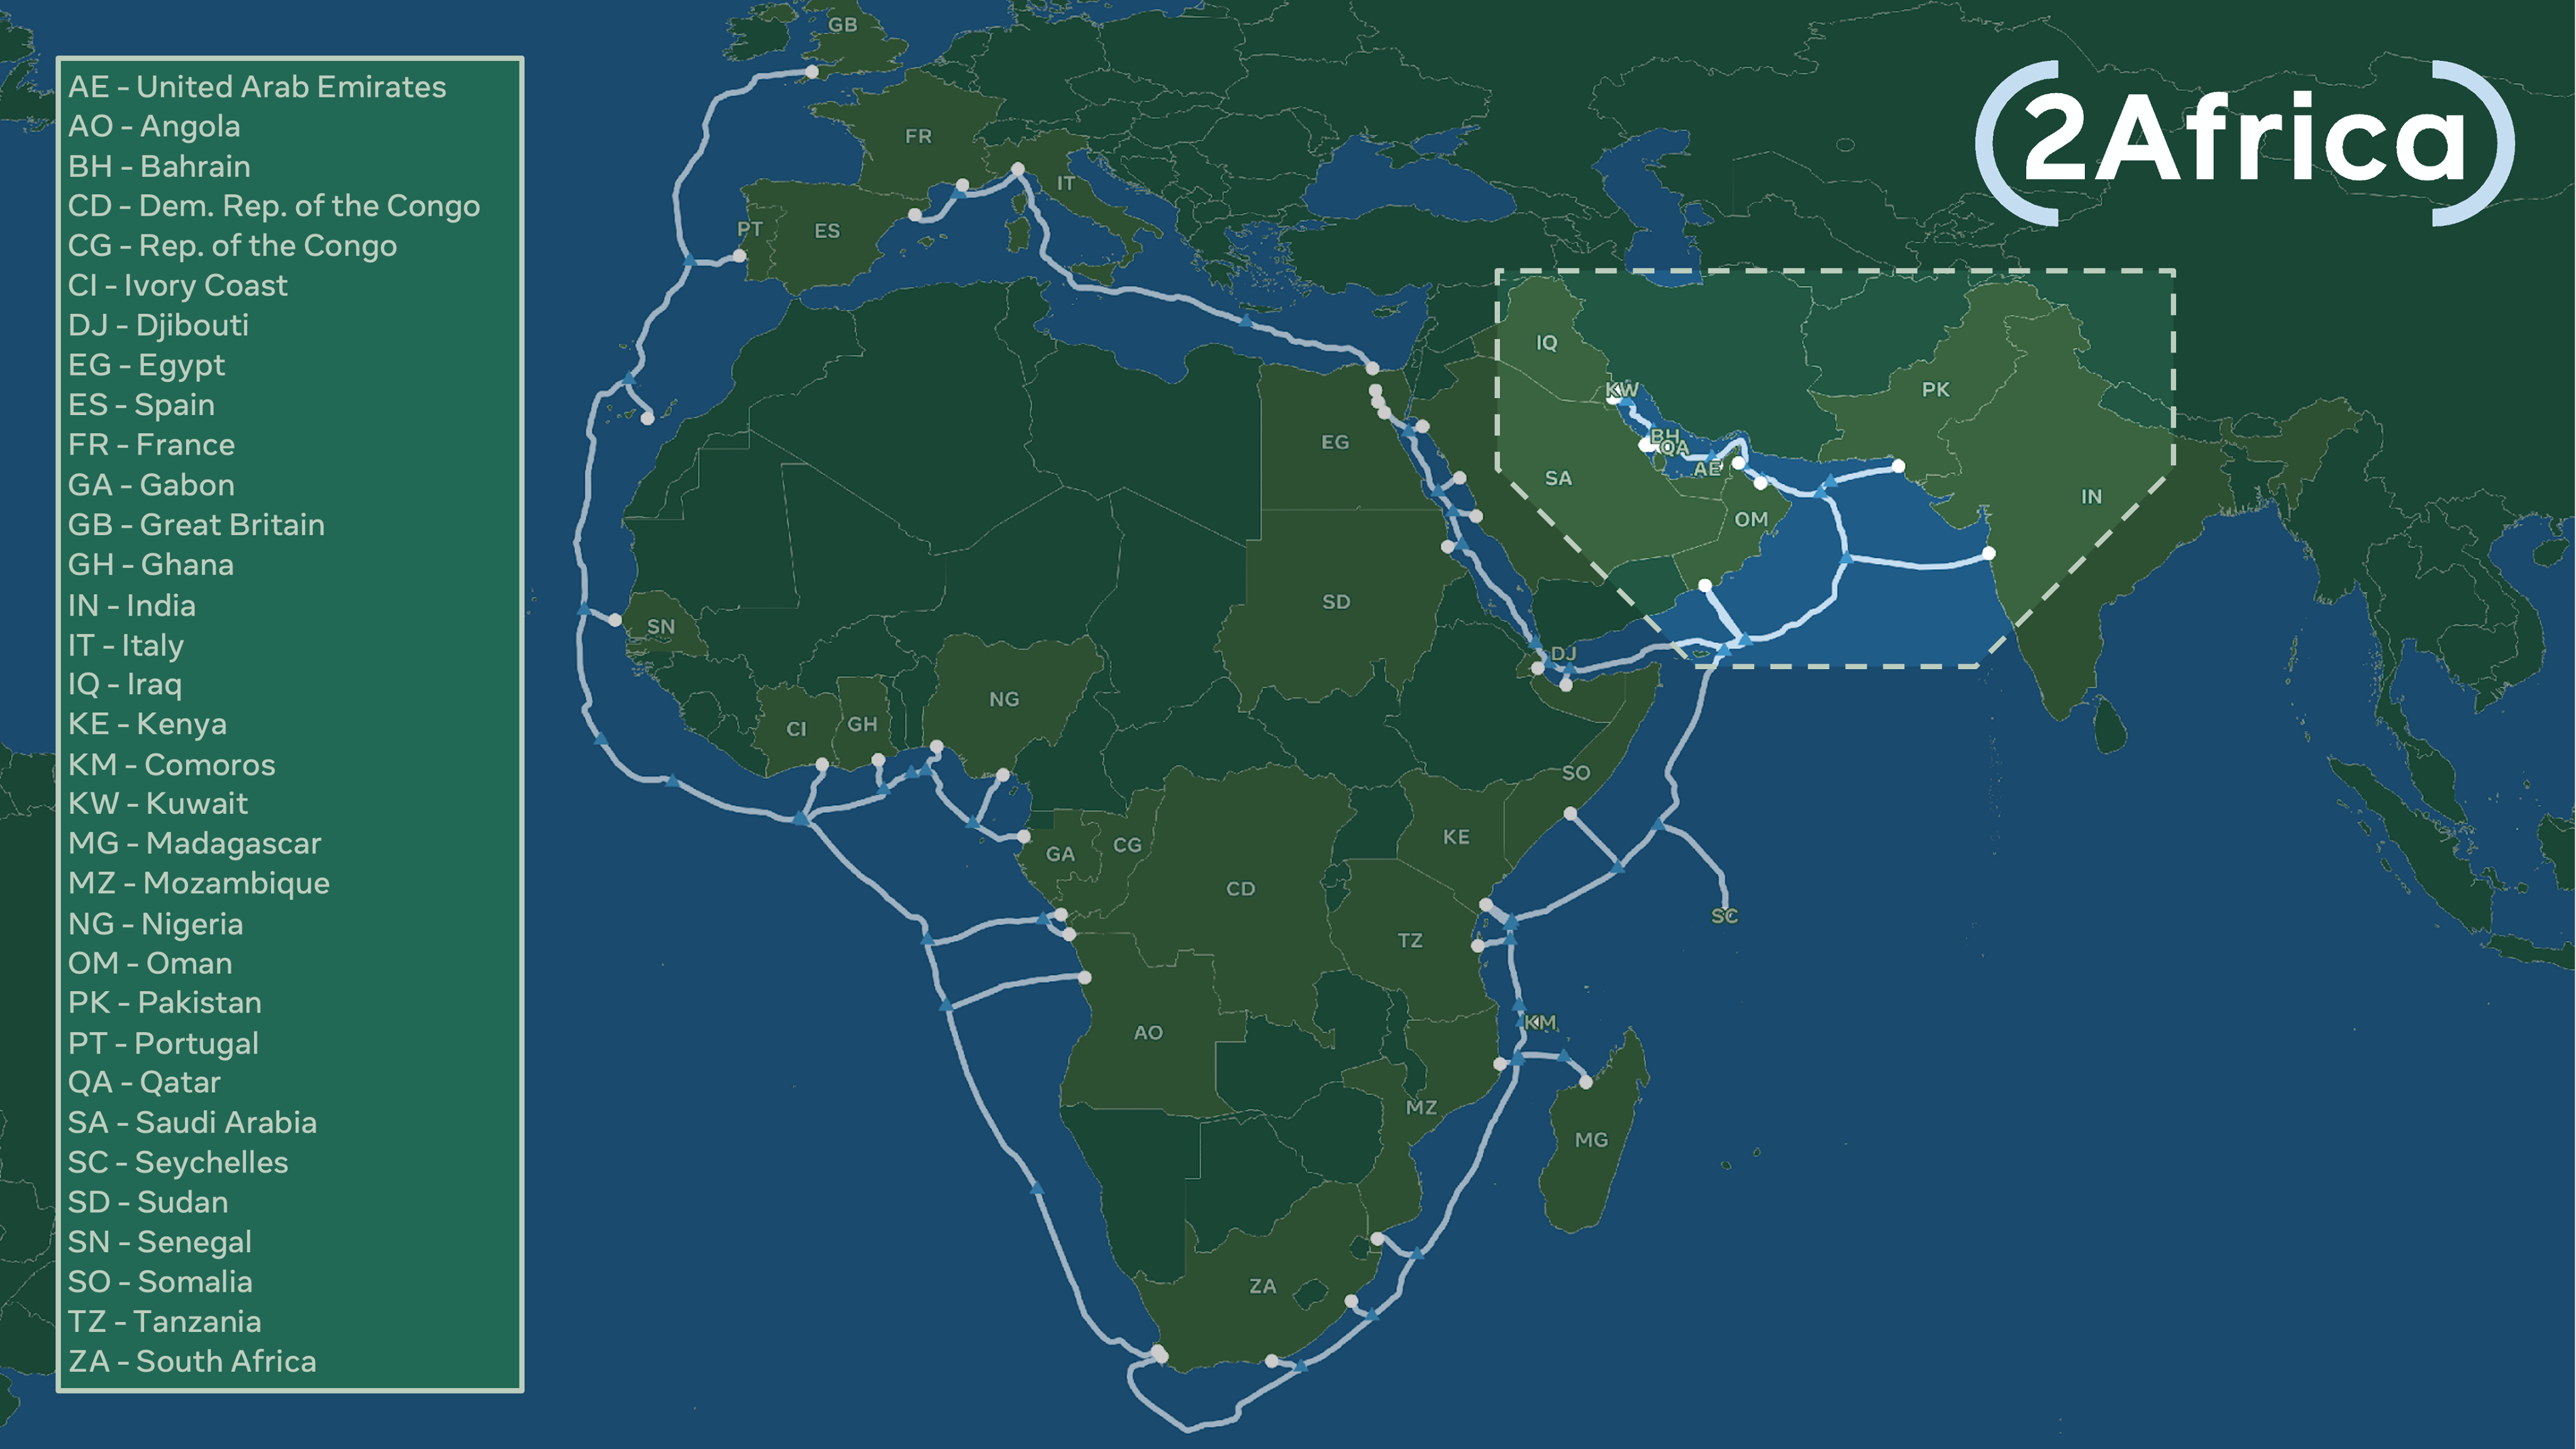 2Africa Extended to the Arabian Gulf, India, and Pakistan- Now the Longest Subsea Cable System in the World